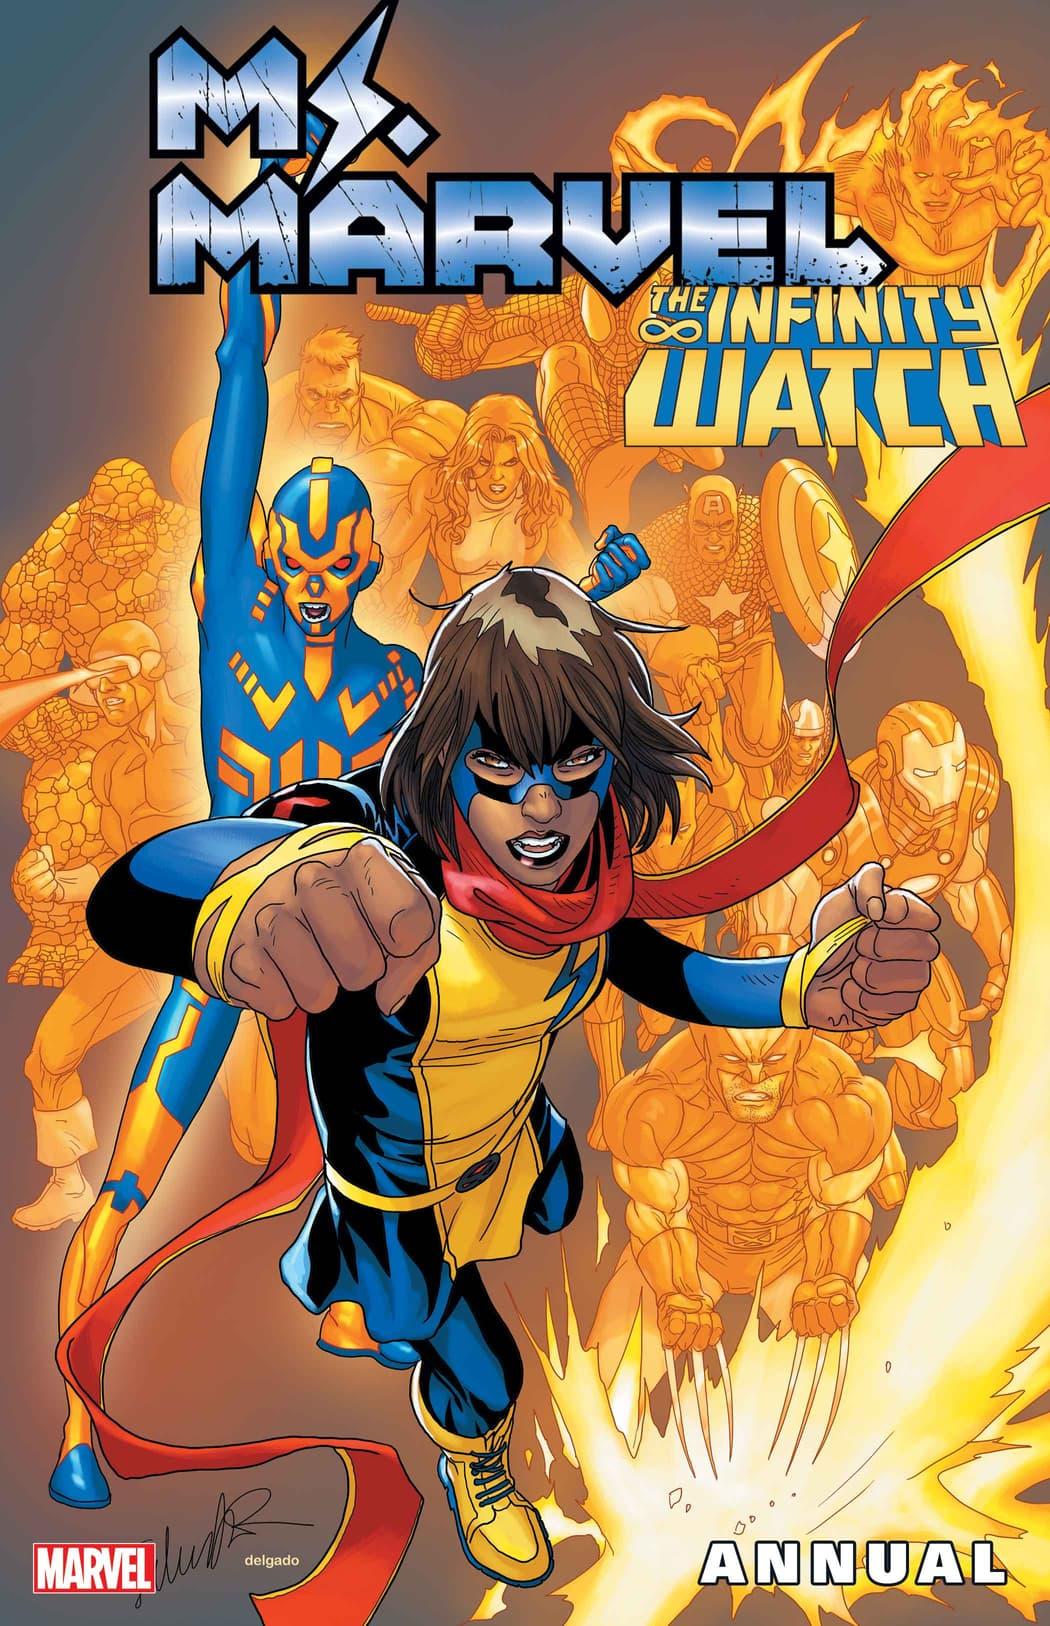 Infinity Watch Ms. Marvel Annual #1 cover art